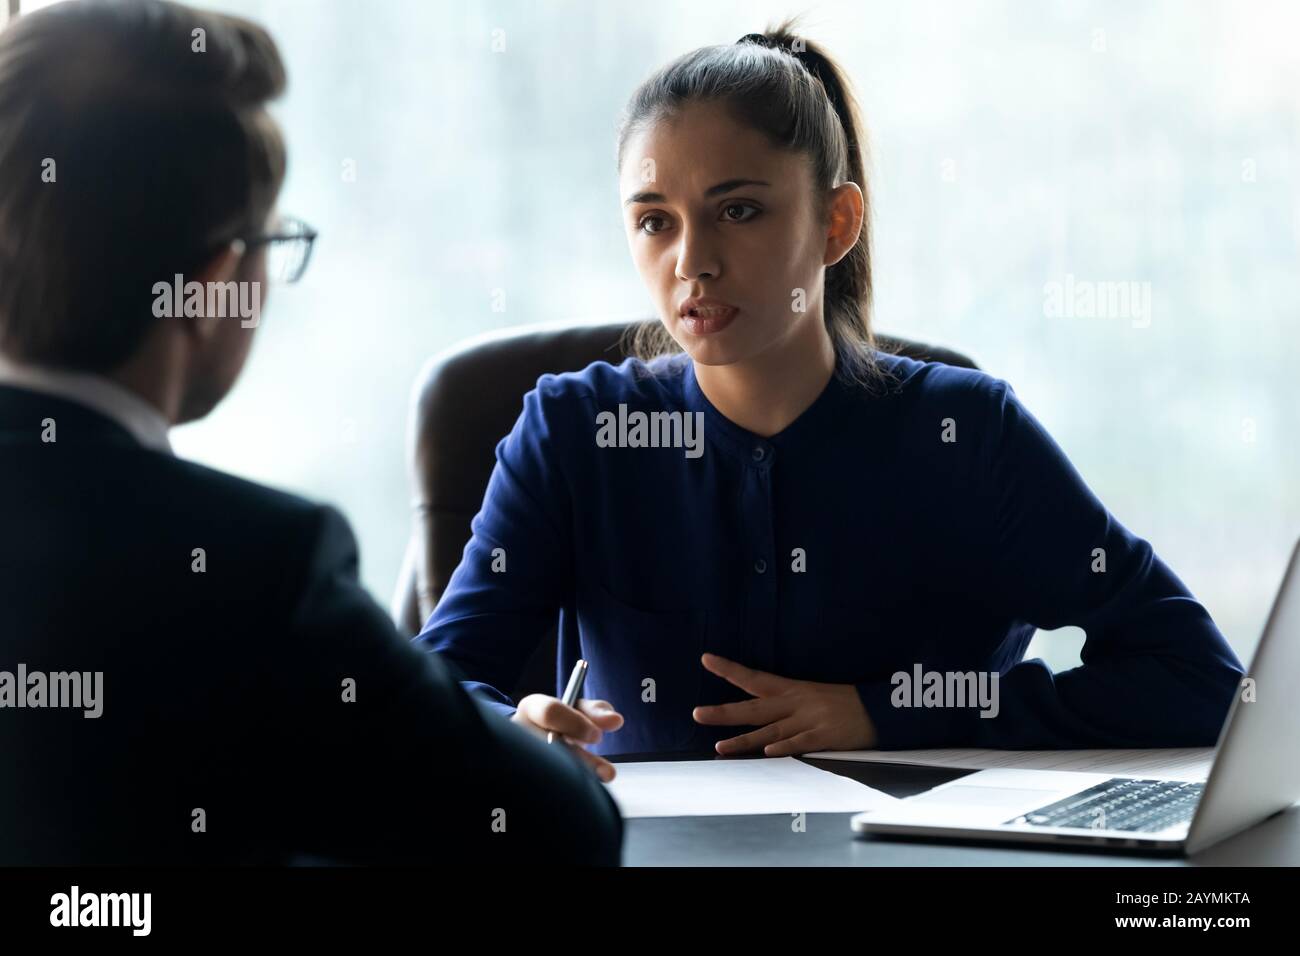 Attractive businesswoman hr interviewing new applicant using cv and laptop. Stock Photo